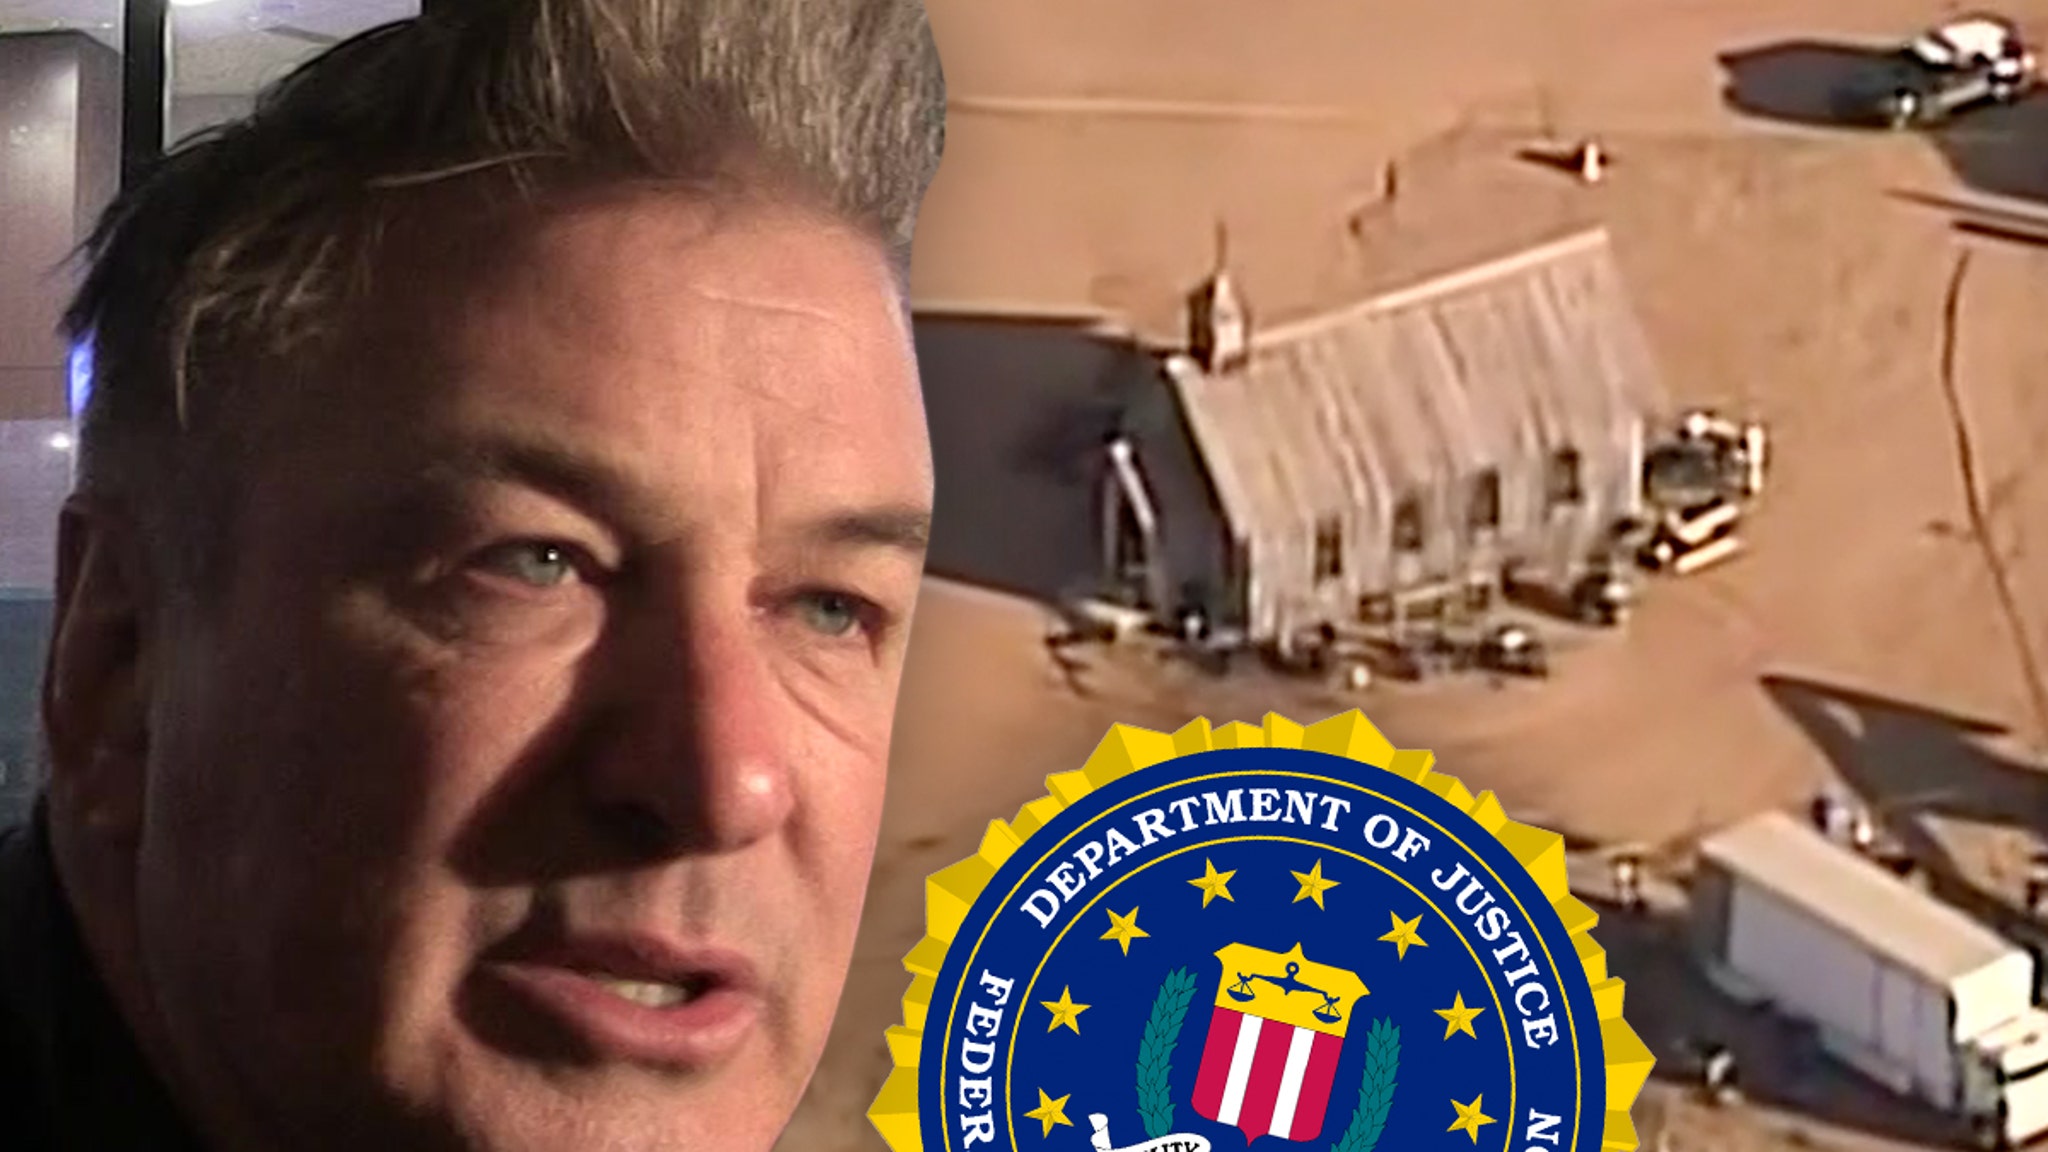 Alec Baldwin Must Have Pulled Trigger in 'Rust' Shooting, FBI Concludes - TMZ : The FBI has concluded that Alec Baldwin must have fired the gun normally on the set of 'Rust' -- which took Halyna Hutchins' life ... this according to a new report.  | Tranquility 國際社群